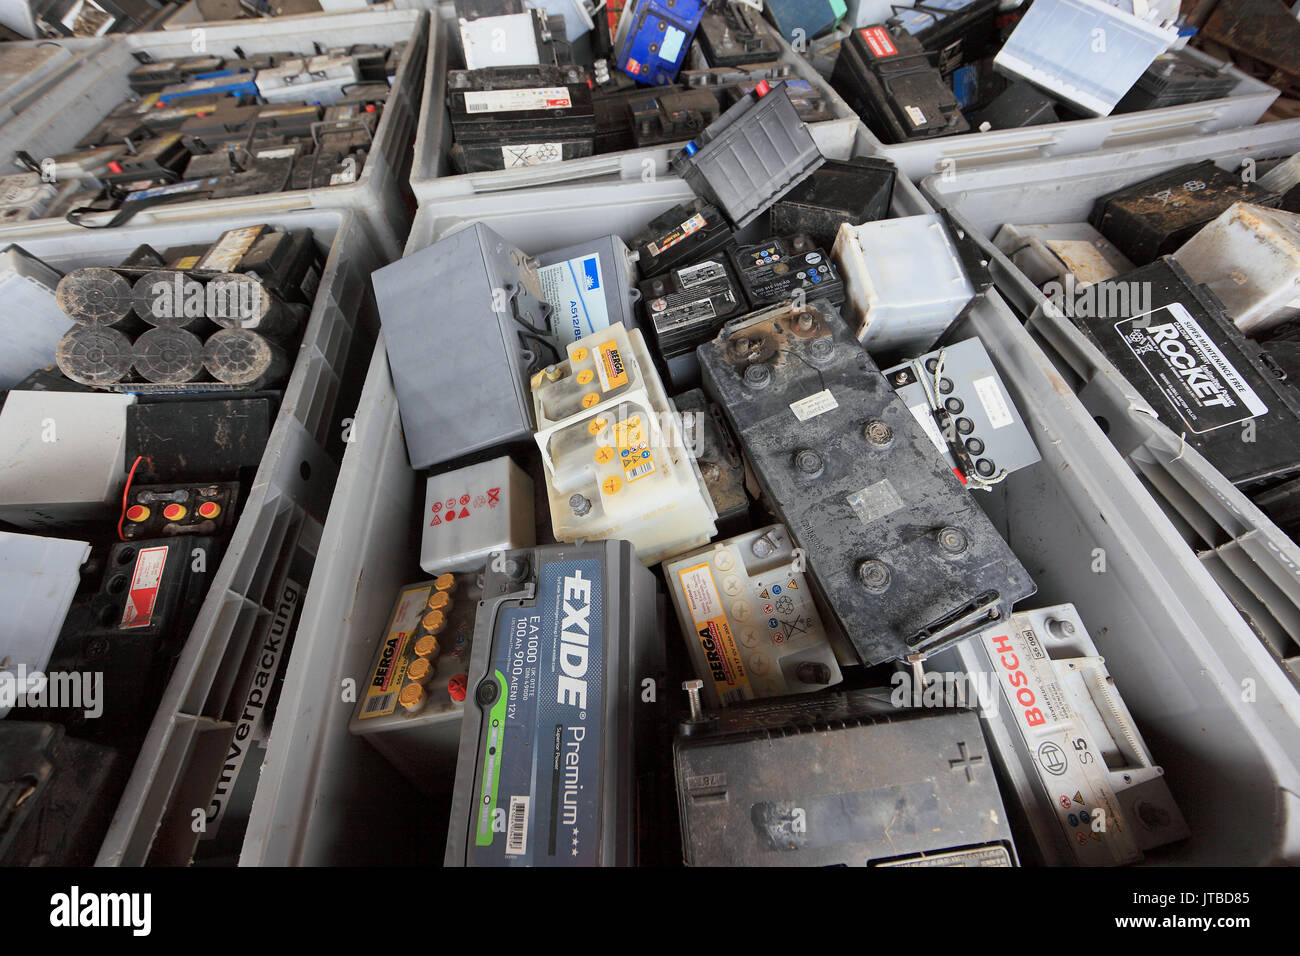 Recycling company, Recyling of old autobatteries, stock, Recyclingbetrieb,  Recyling von alten Autobatterien, Lager Stock Photo - Alamy